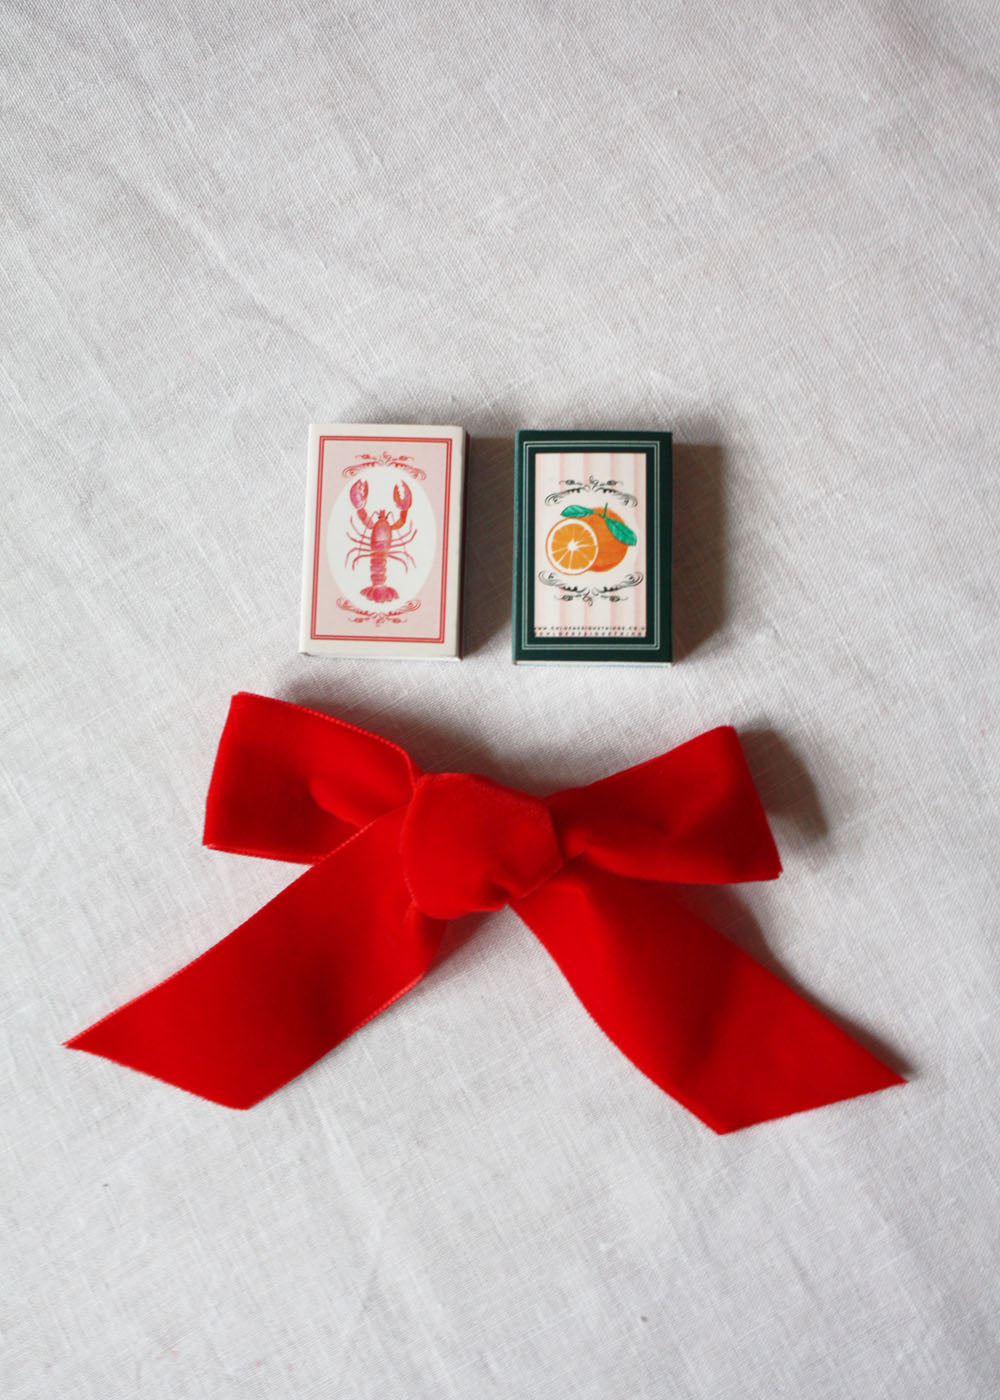 Cocolulu x Chloe Designs Things Ric-rac Lobster candles and match box set